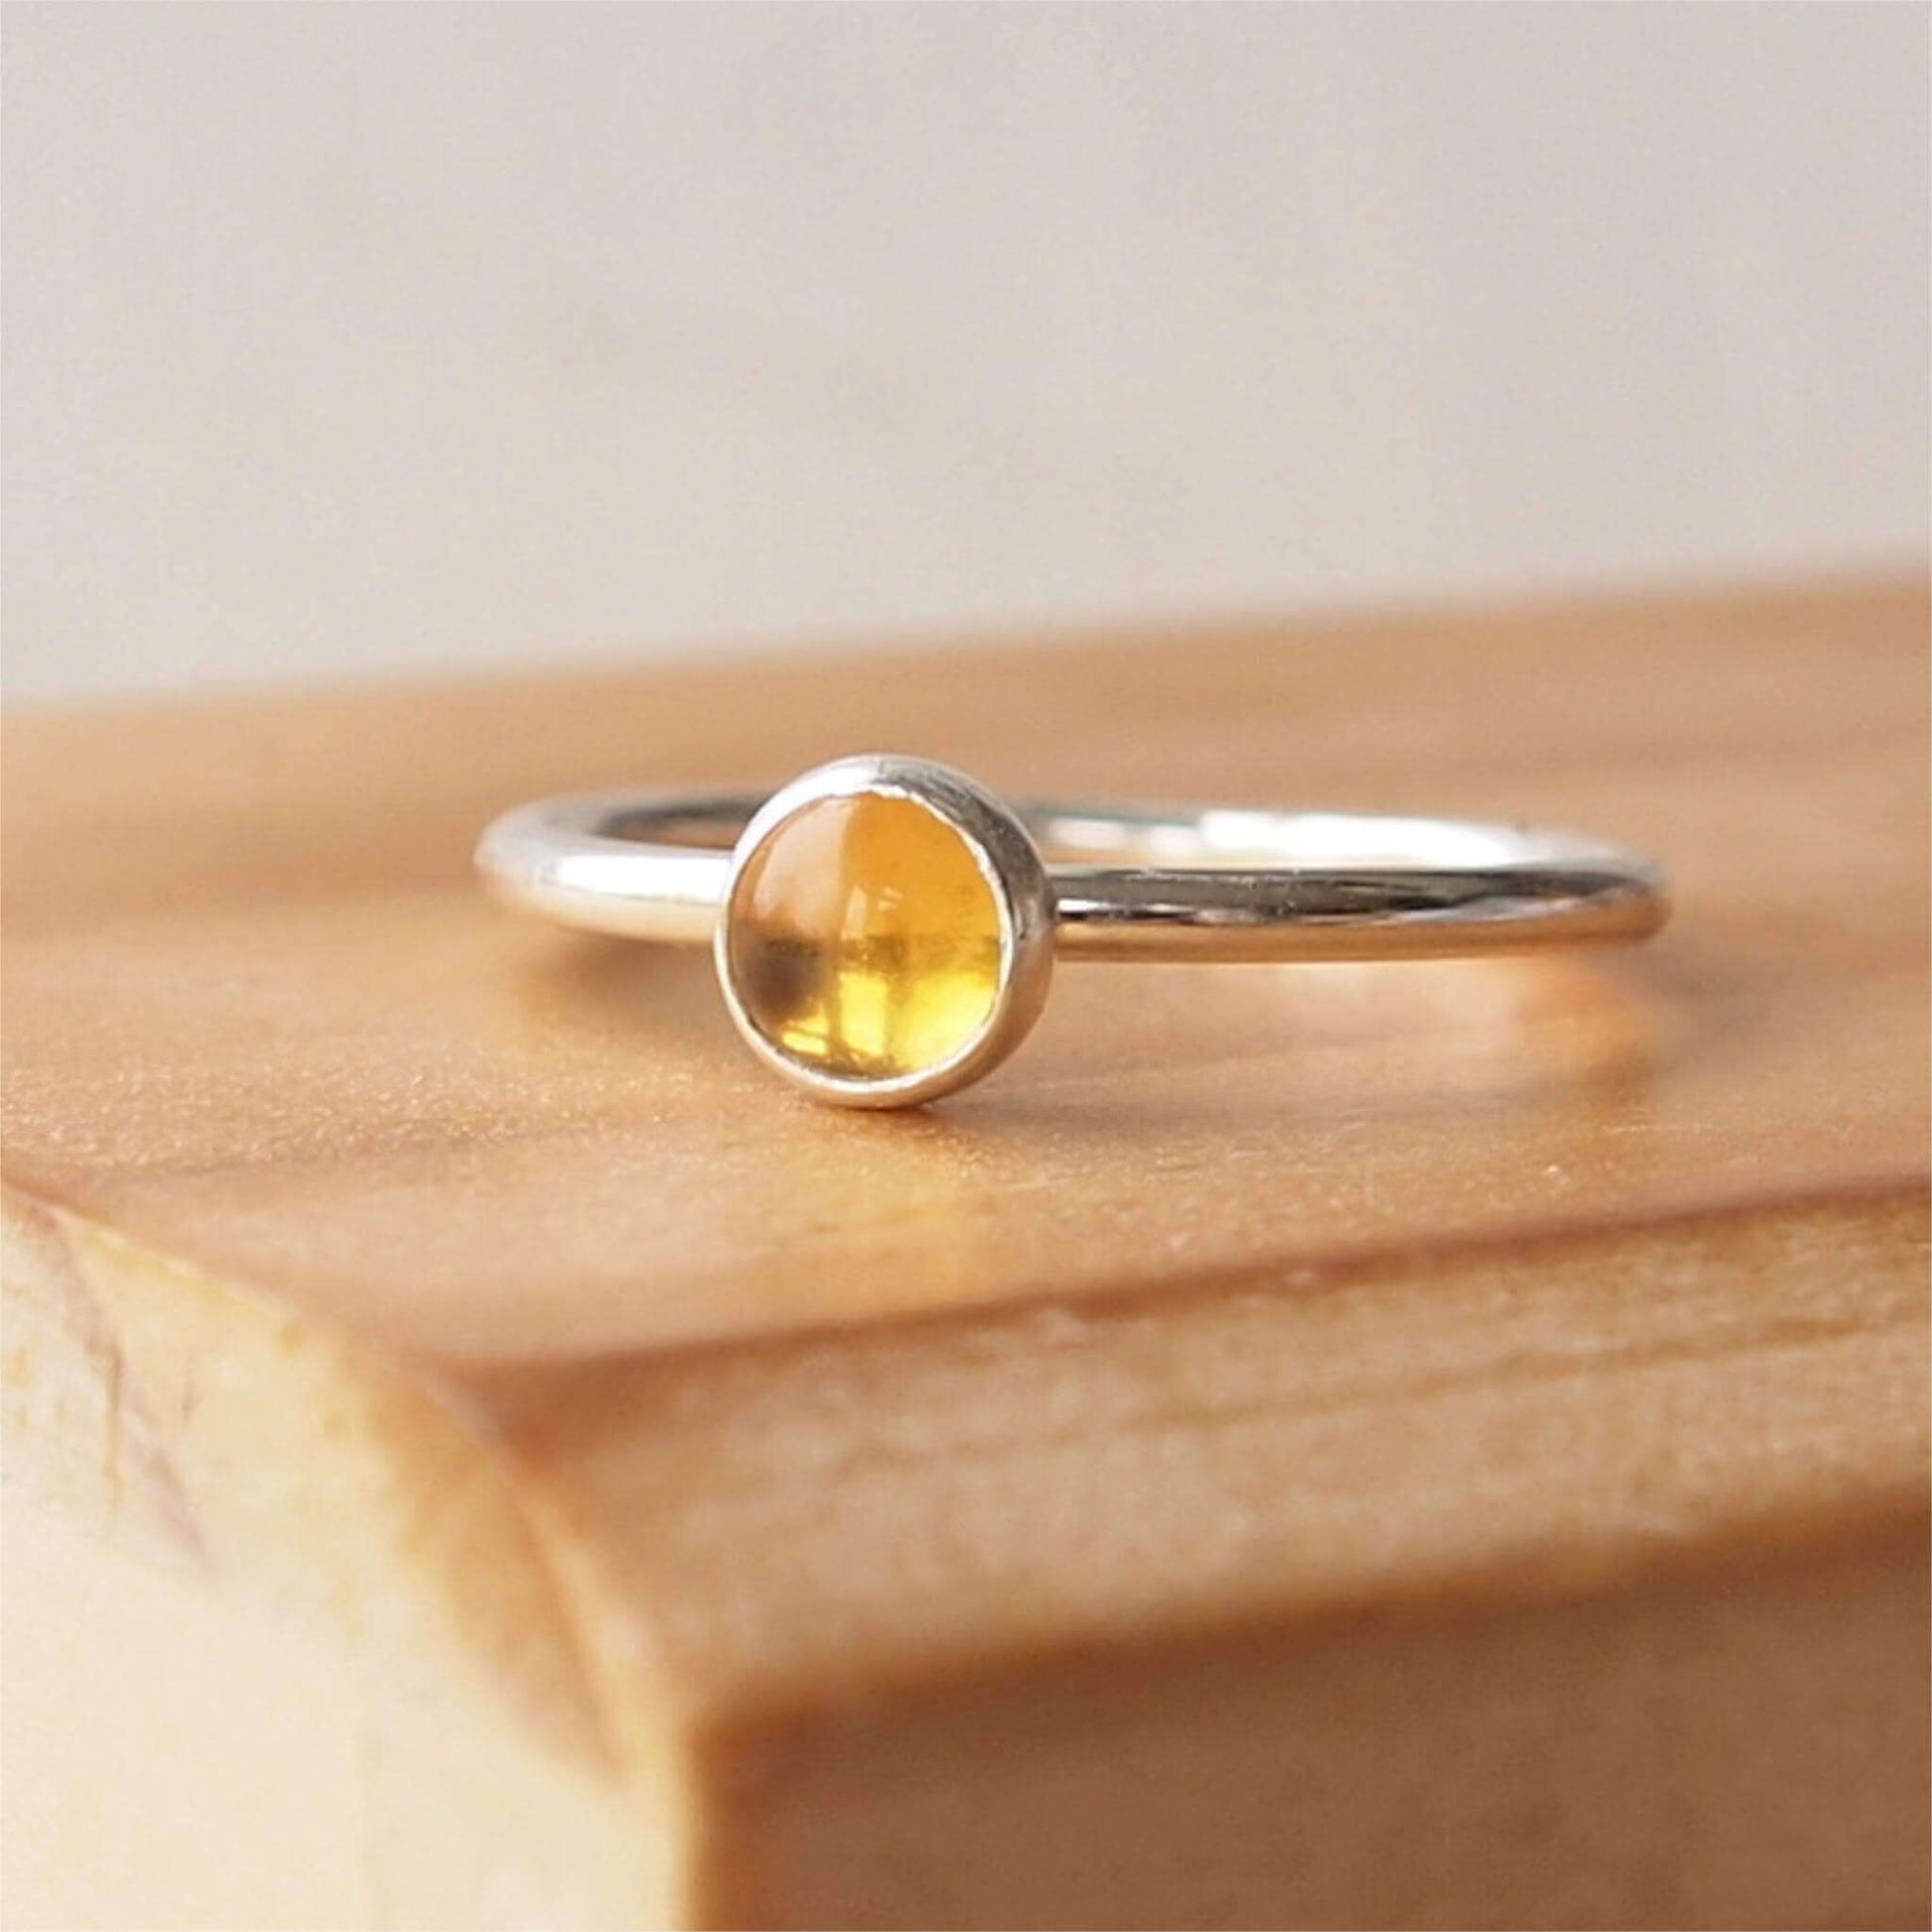 Citrine and Sterling Silver Ring made from a 5mm round warm yellow citrine gemstone set simply onto a modern band of round wire. Handmade to your ring size by maram jewellery in Scotland